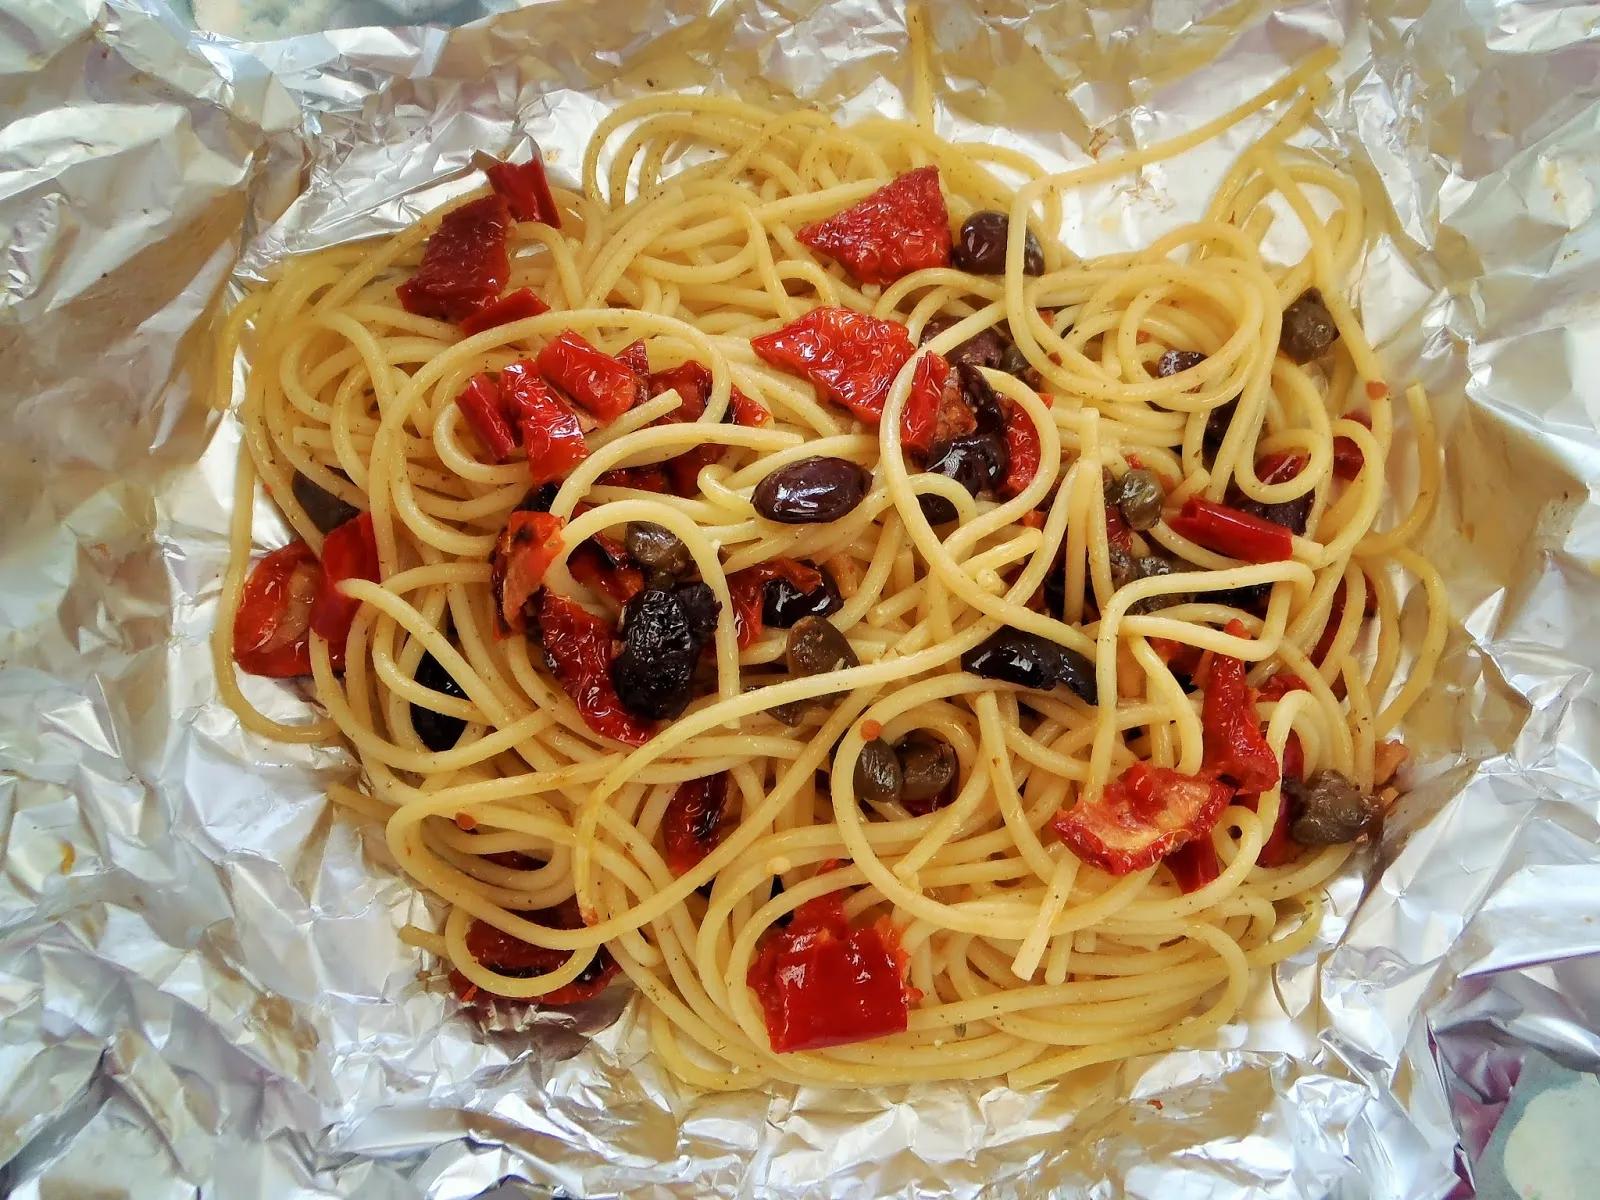 An Italian in the Kitchen: Spaghetti baked in the foil package